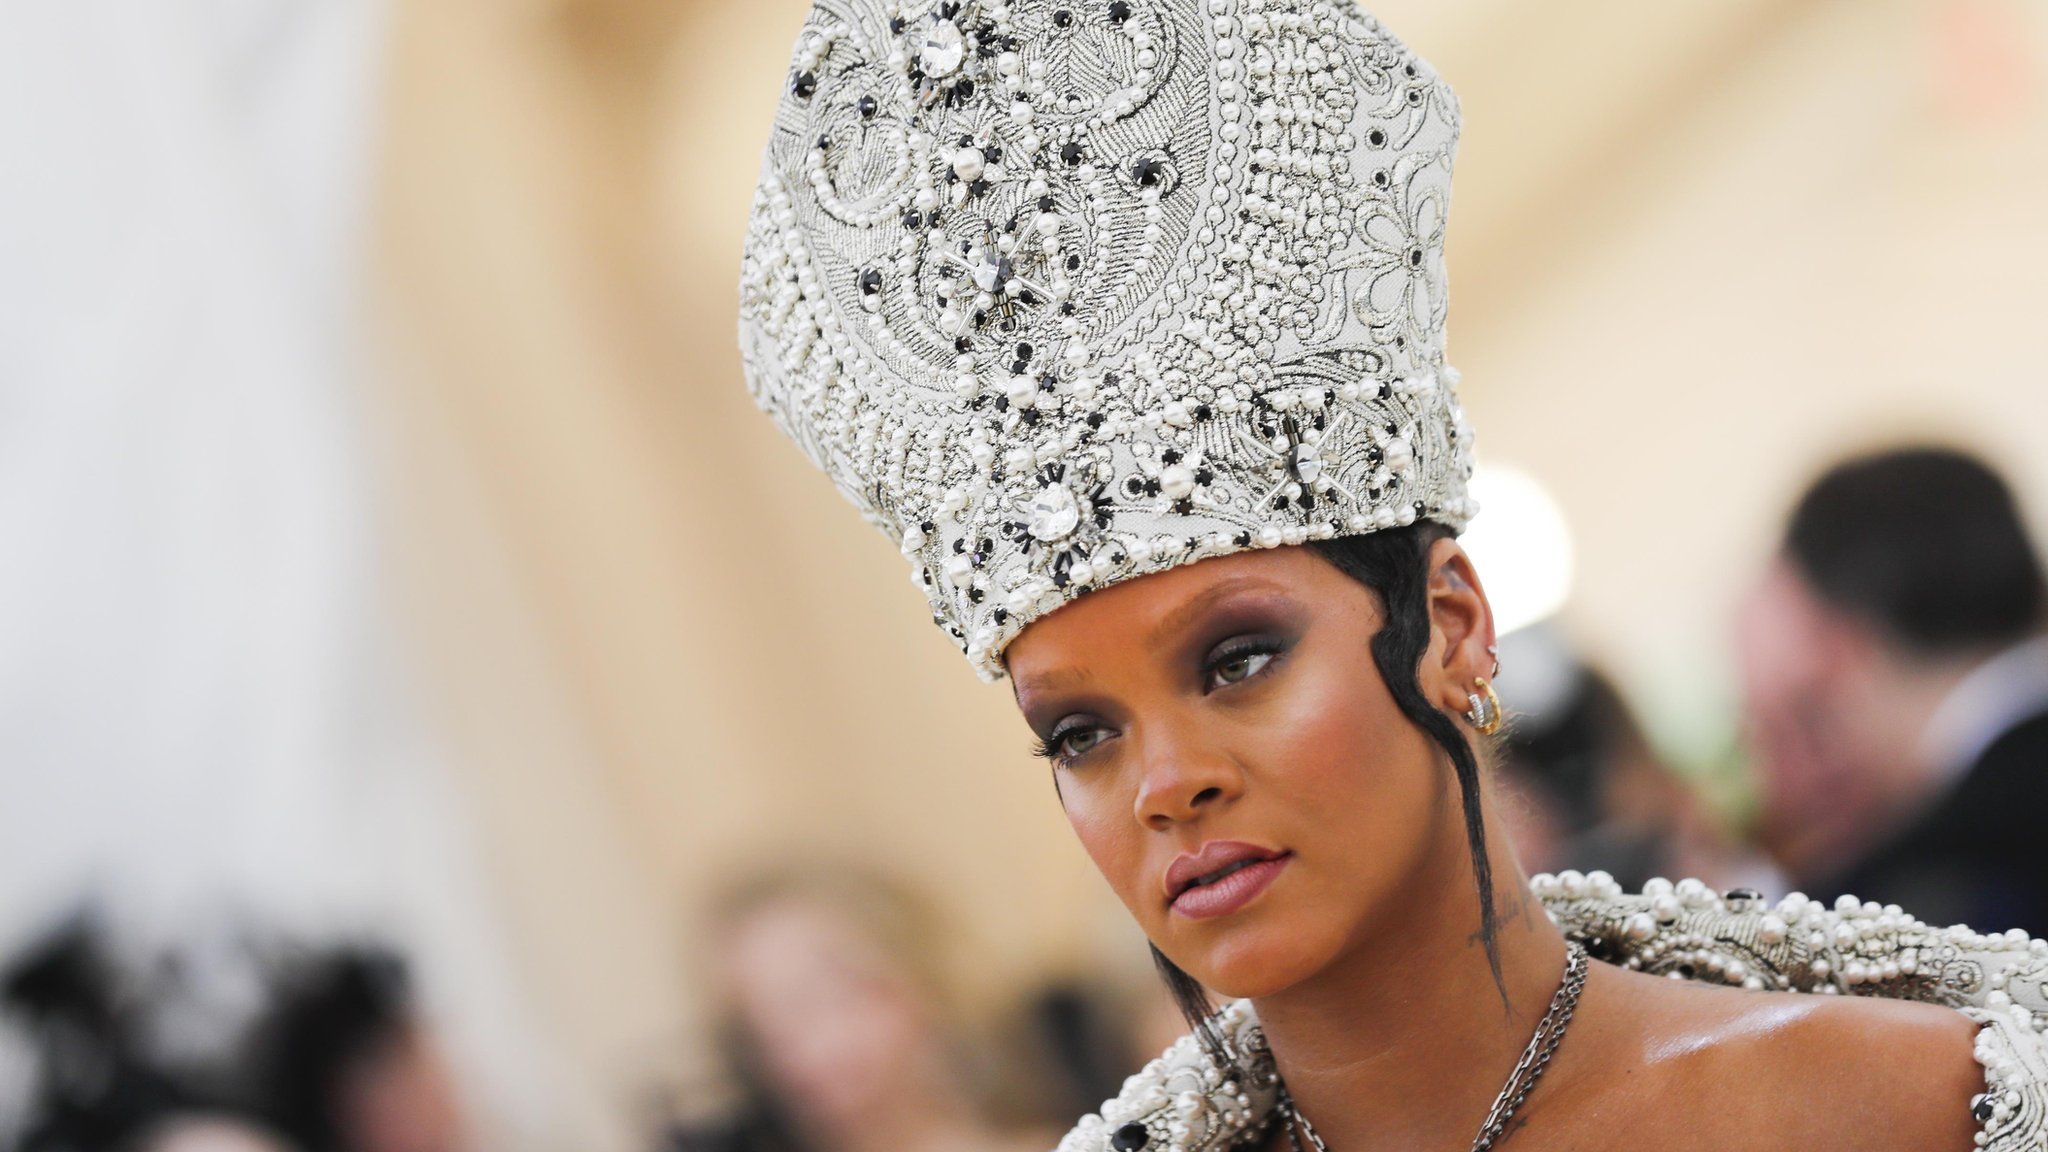 Singer Rihanna arrives at the Metropolitan Museum of Art Costume Institute Gala (Met Gala) to celebrate the opening of Heavenly Bodies: Fashion and the Catholic Imagination in the Manhattan borough of New York, U.S., May 7, 2018.